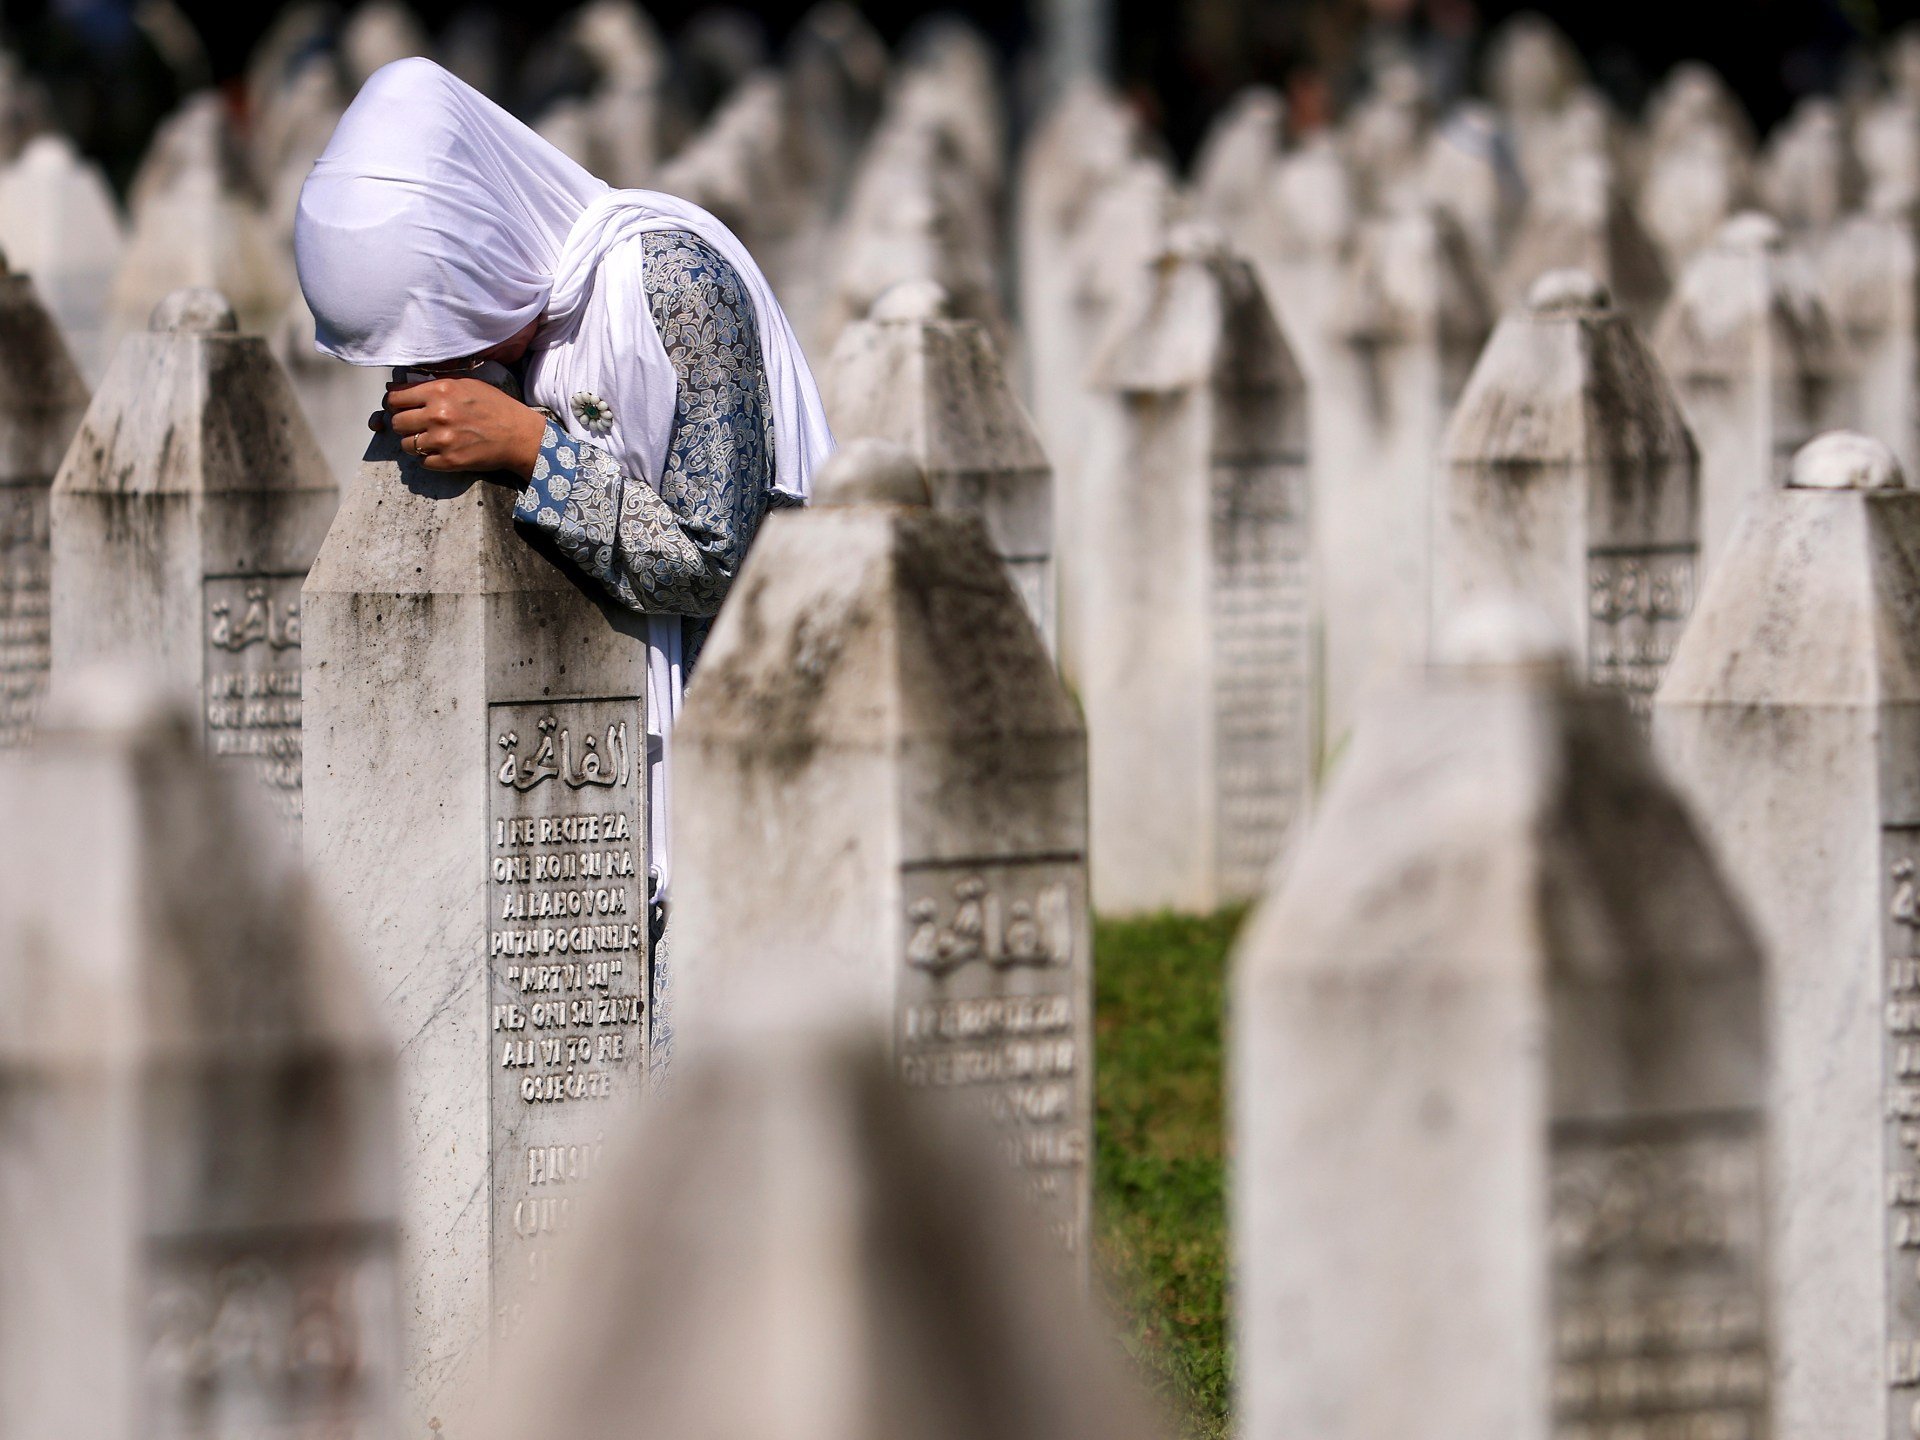 Remains of 14 Srebrenica victims to be buried 29 years after genocide